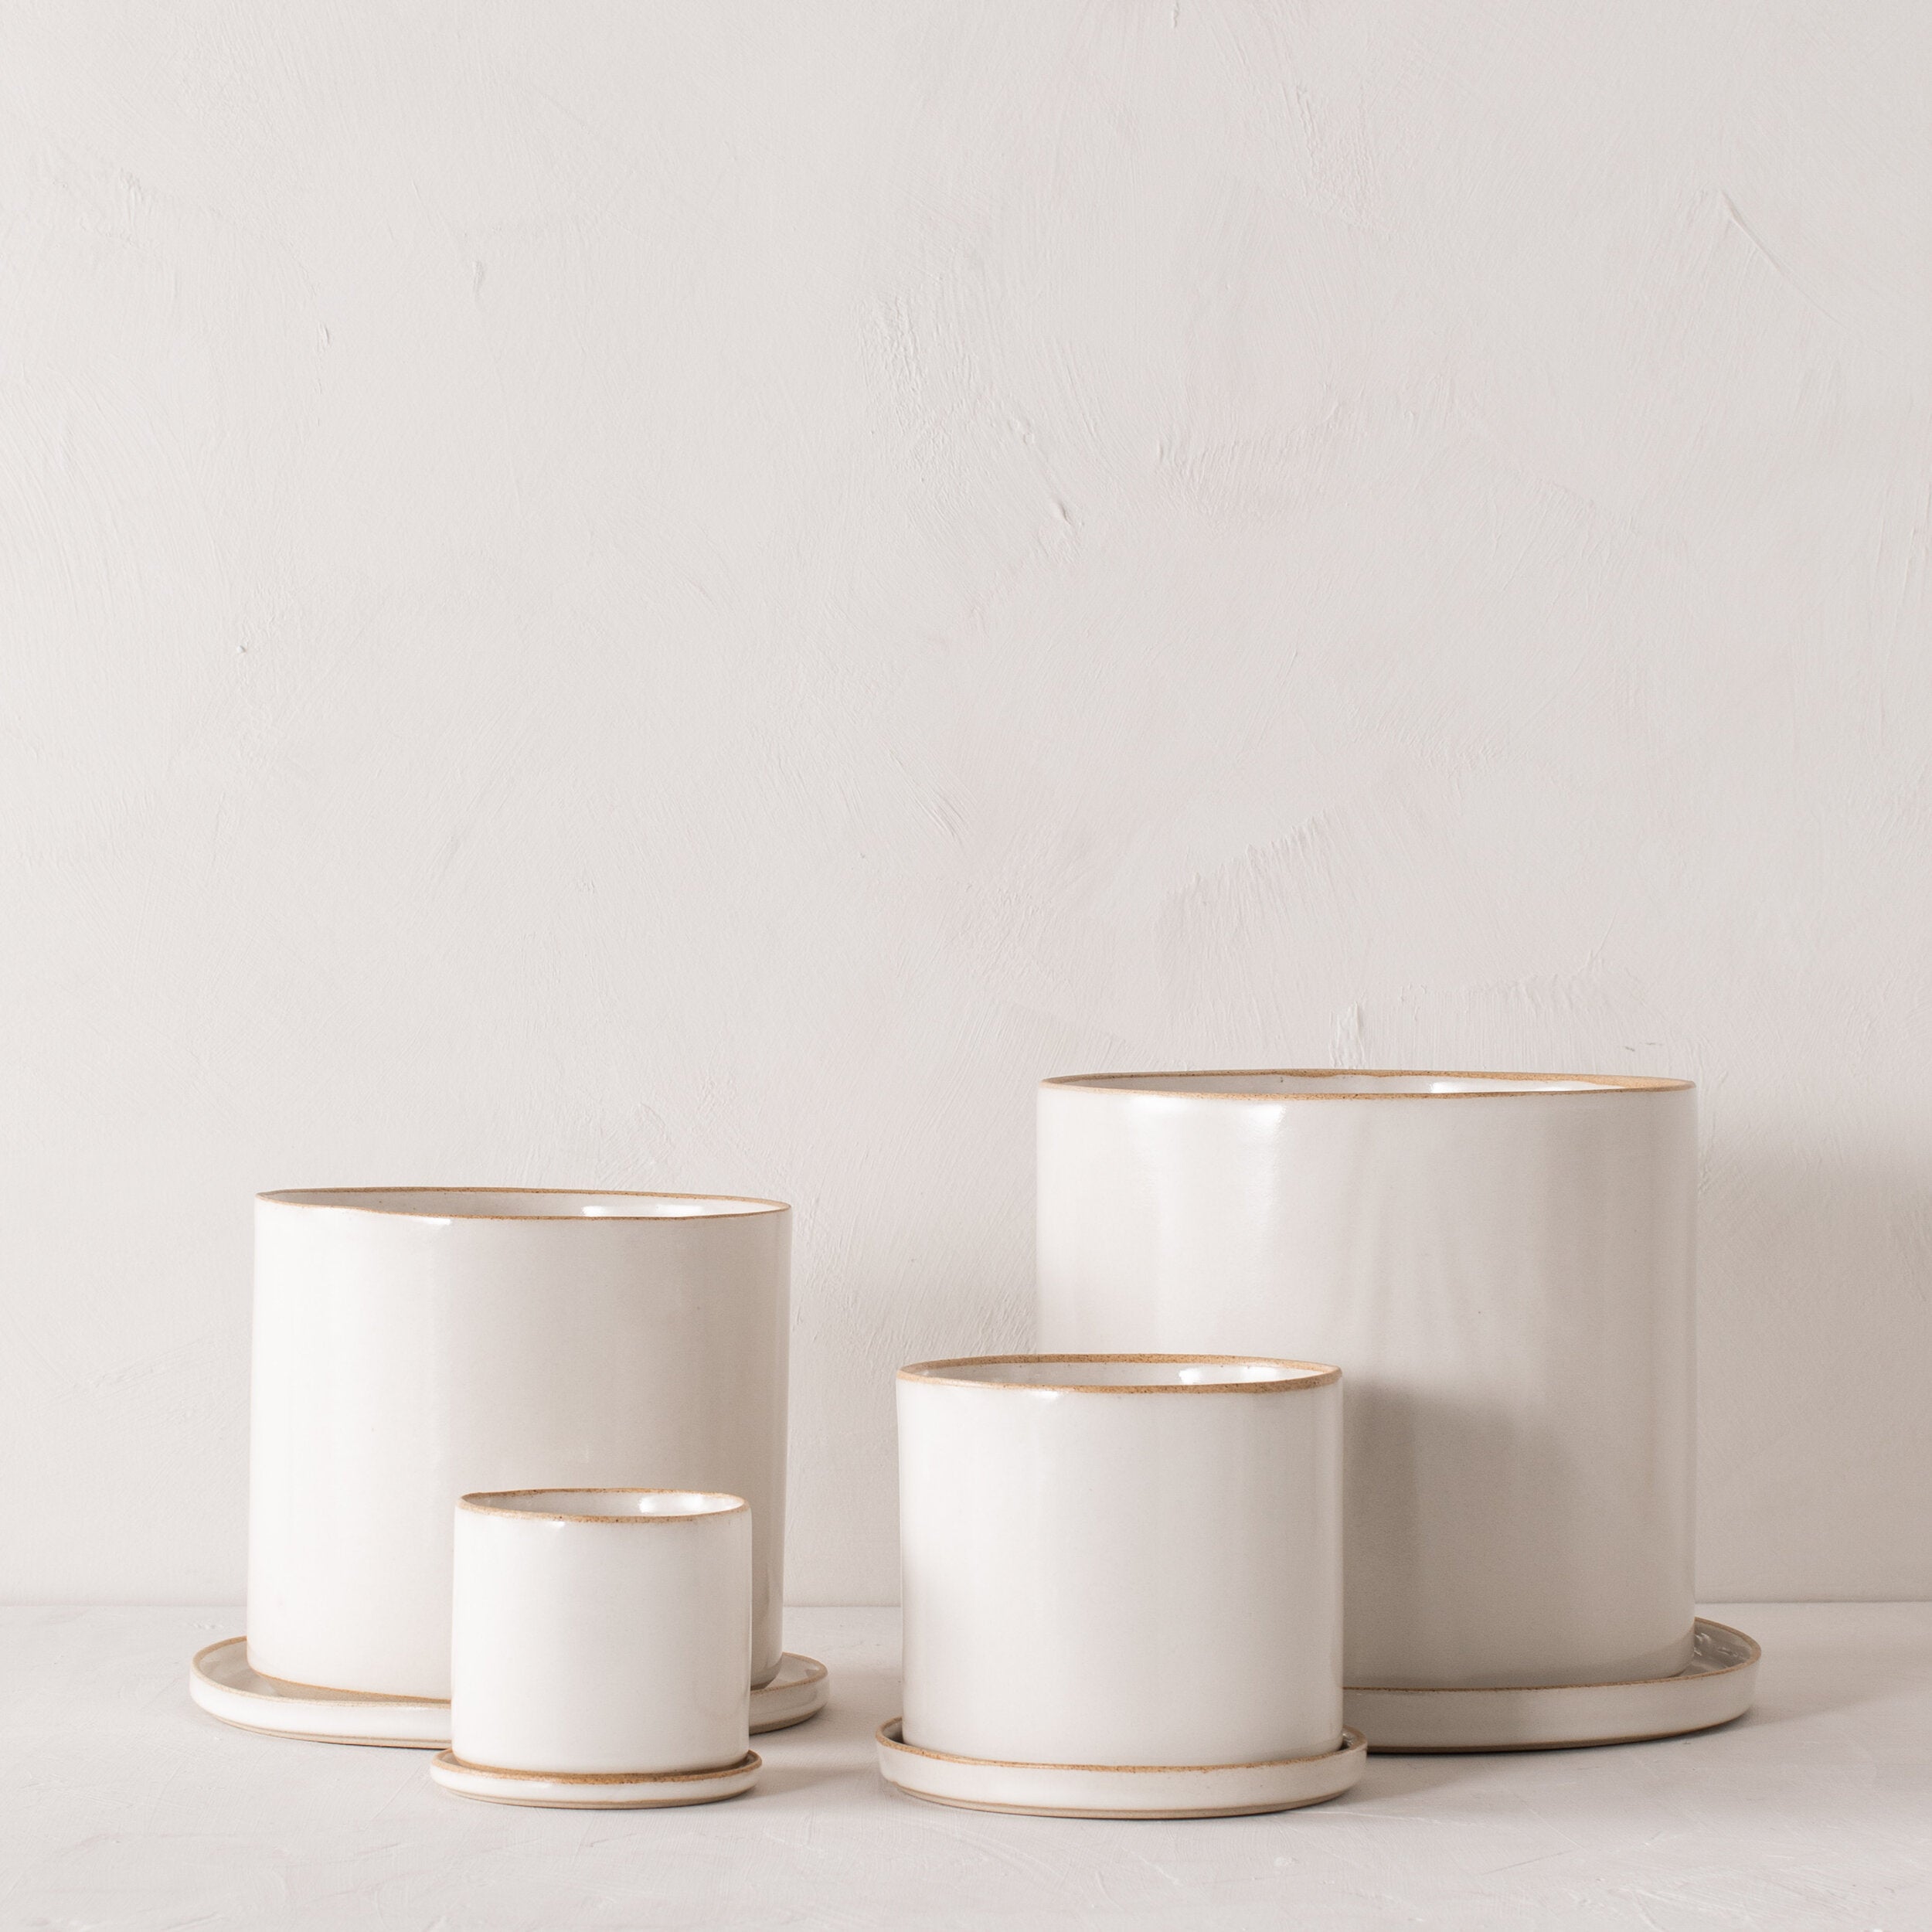 Four white ceramic planters with bottom drainage dishes, 4, 6, 8, and 10 inches. Staged on a white plaster textured tabletop against a plaster textured white wall. Designed and sold by Convivial Production, Kansas City Ceramics.  Edit alt text